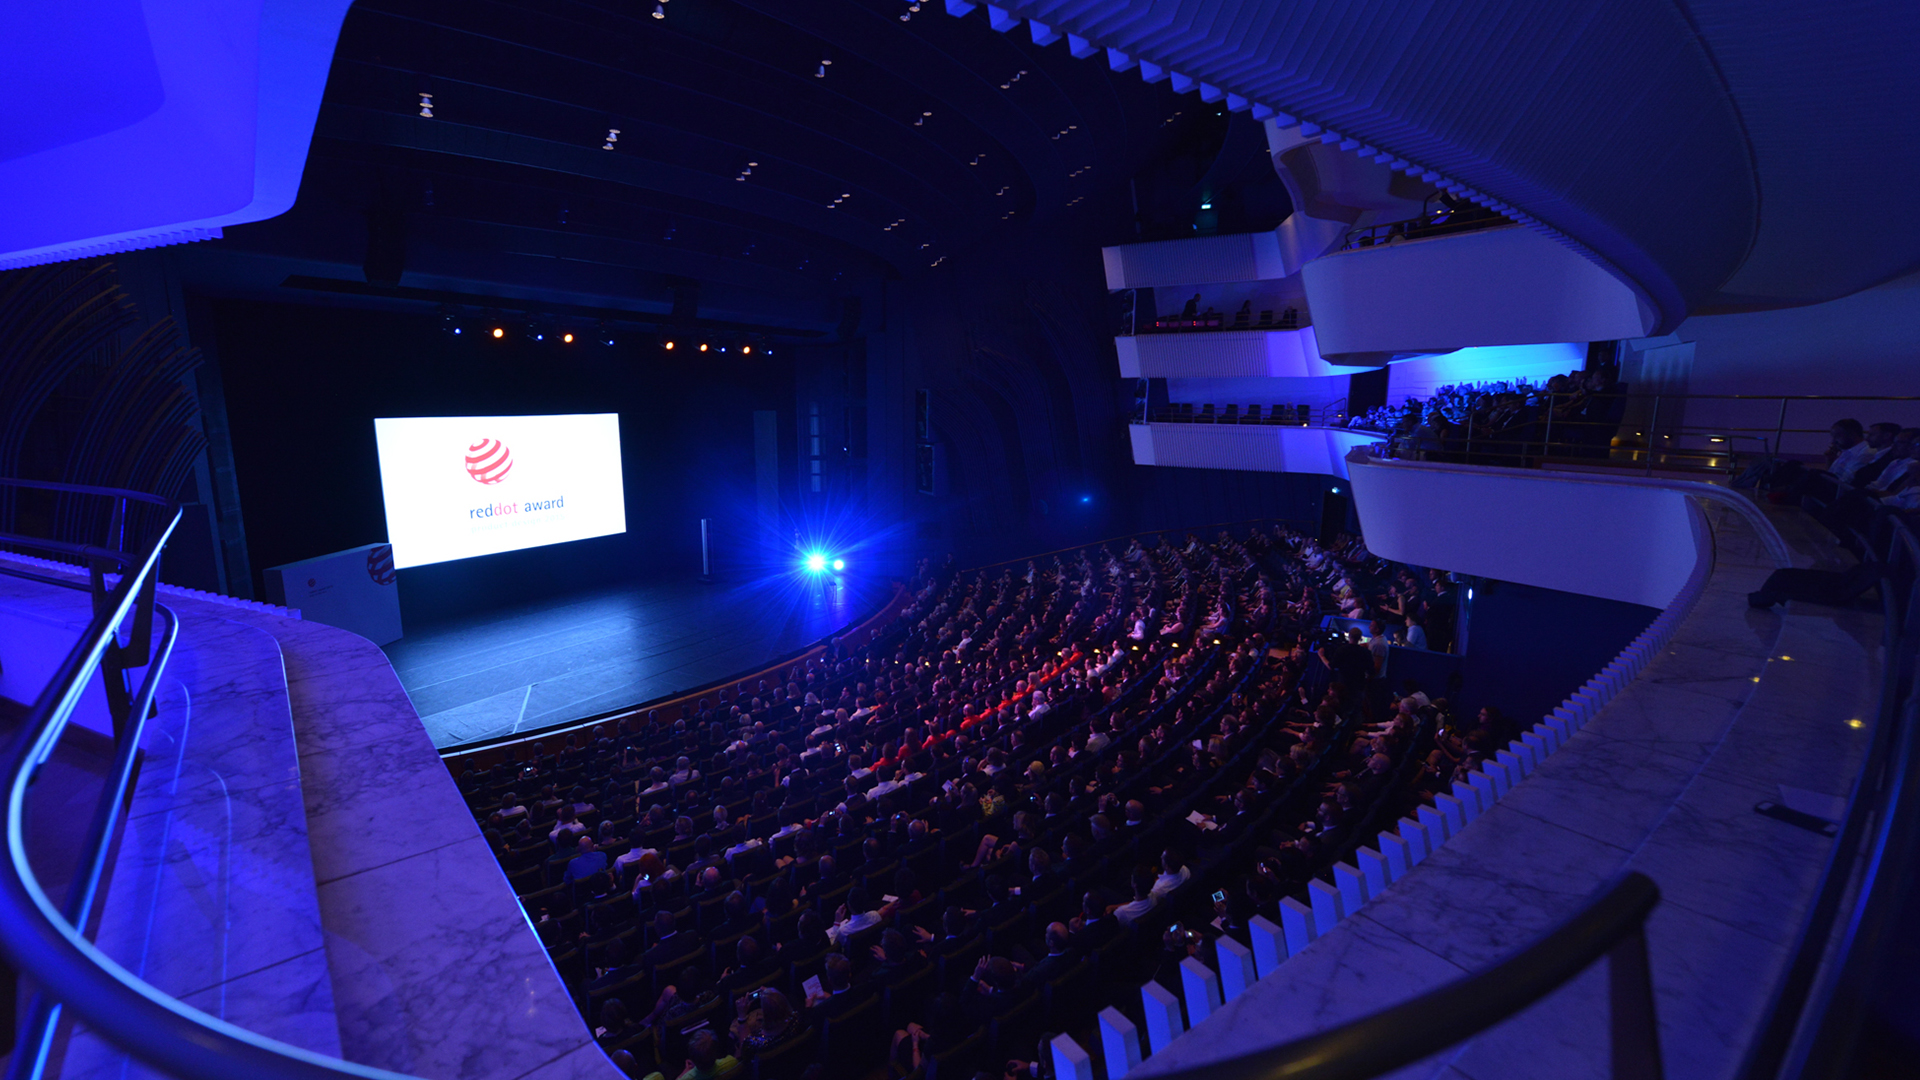 Curtain up for the red dot gala 2015! designship GmbH clears twice. There is the "red dot award - Best of the best" for the trend-setting design of the new WMF espresso, as well as the "red dot design award" for the outstanding design of the crossbar robot 4.0 from the Schuler Group. red dot award 2015 - best of the best - design award - designship GmbH - product design - industrial design - interface design - iF world design index - Top 25 Industry - Top 100 design studios worldwide - we love design